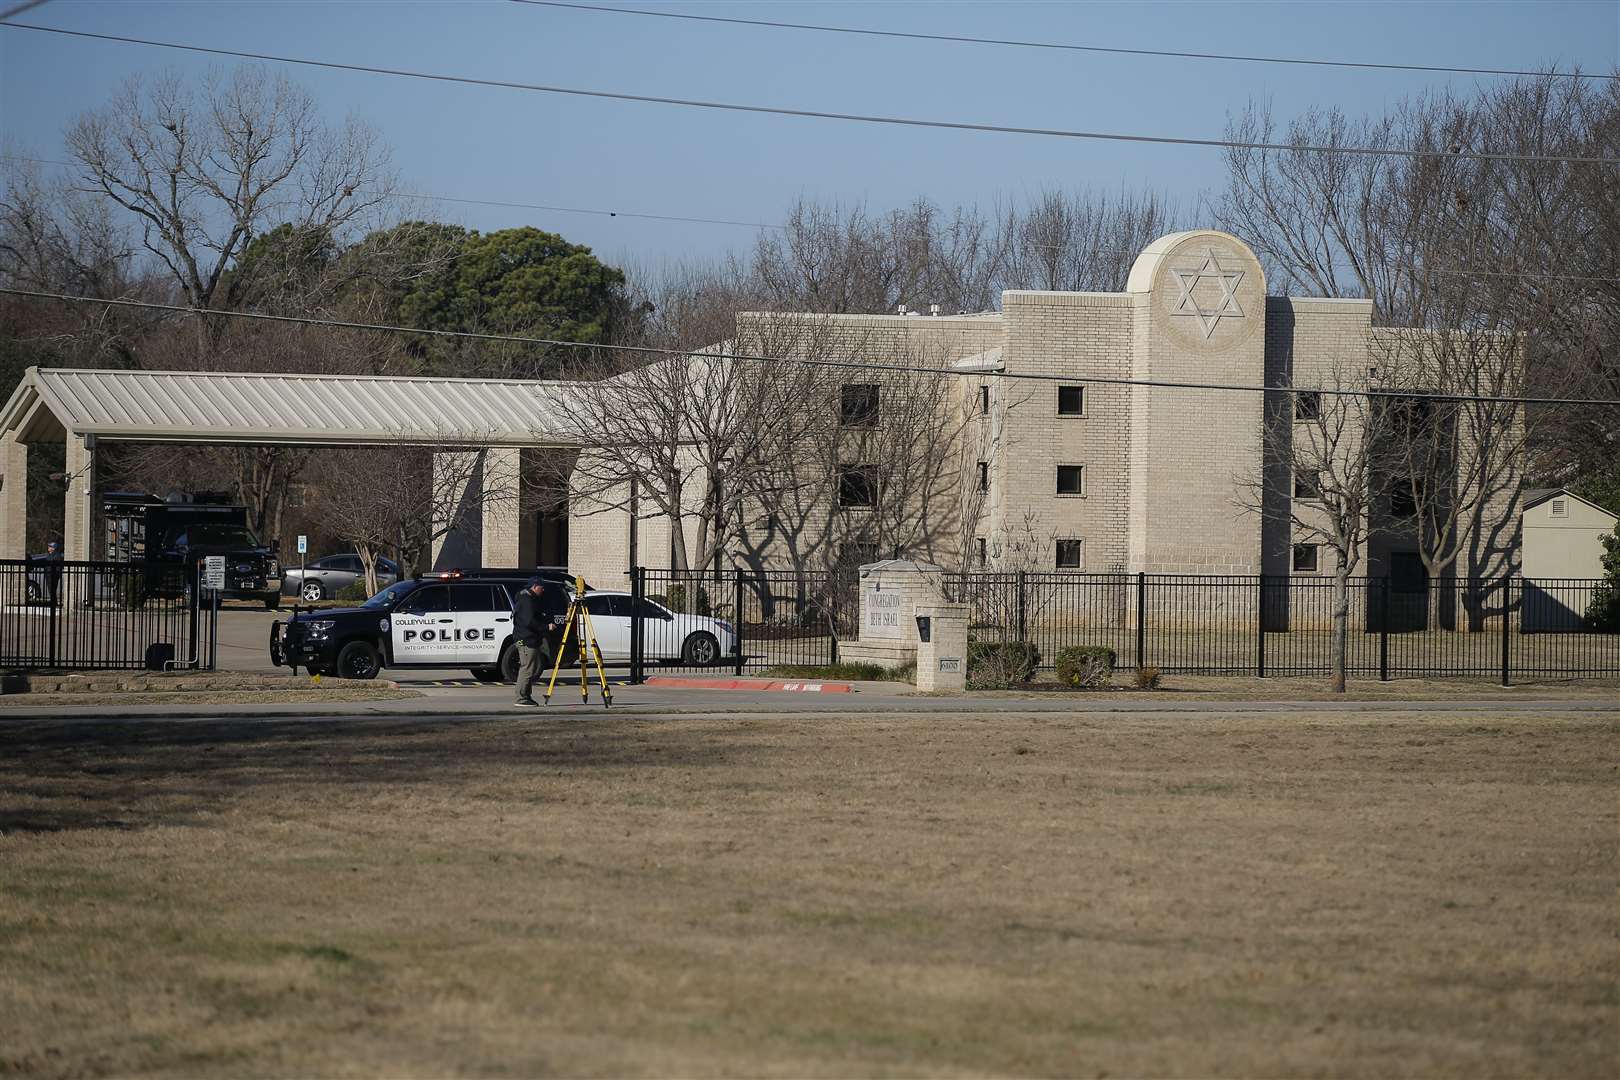 The incident occurred at the Congregation Beth Israel Synagogue in Colleyville, Texas (Brandon Wade/AP)